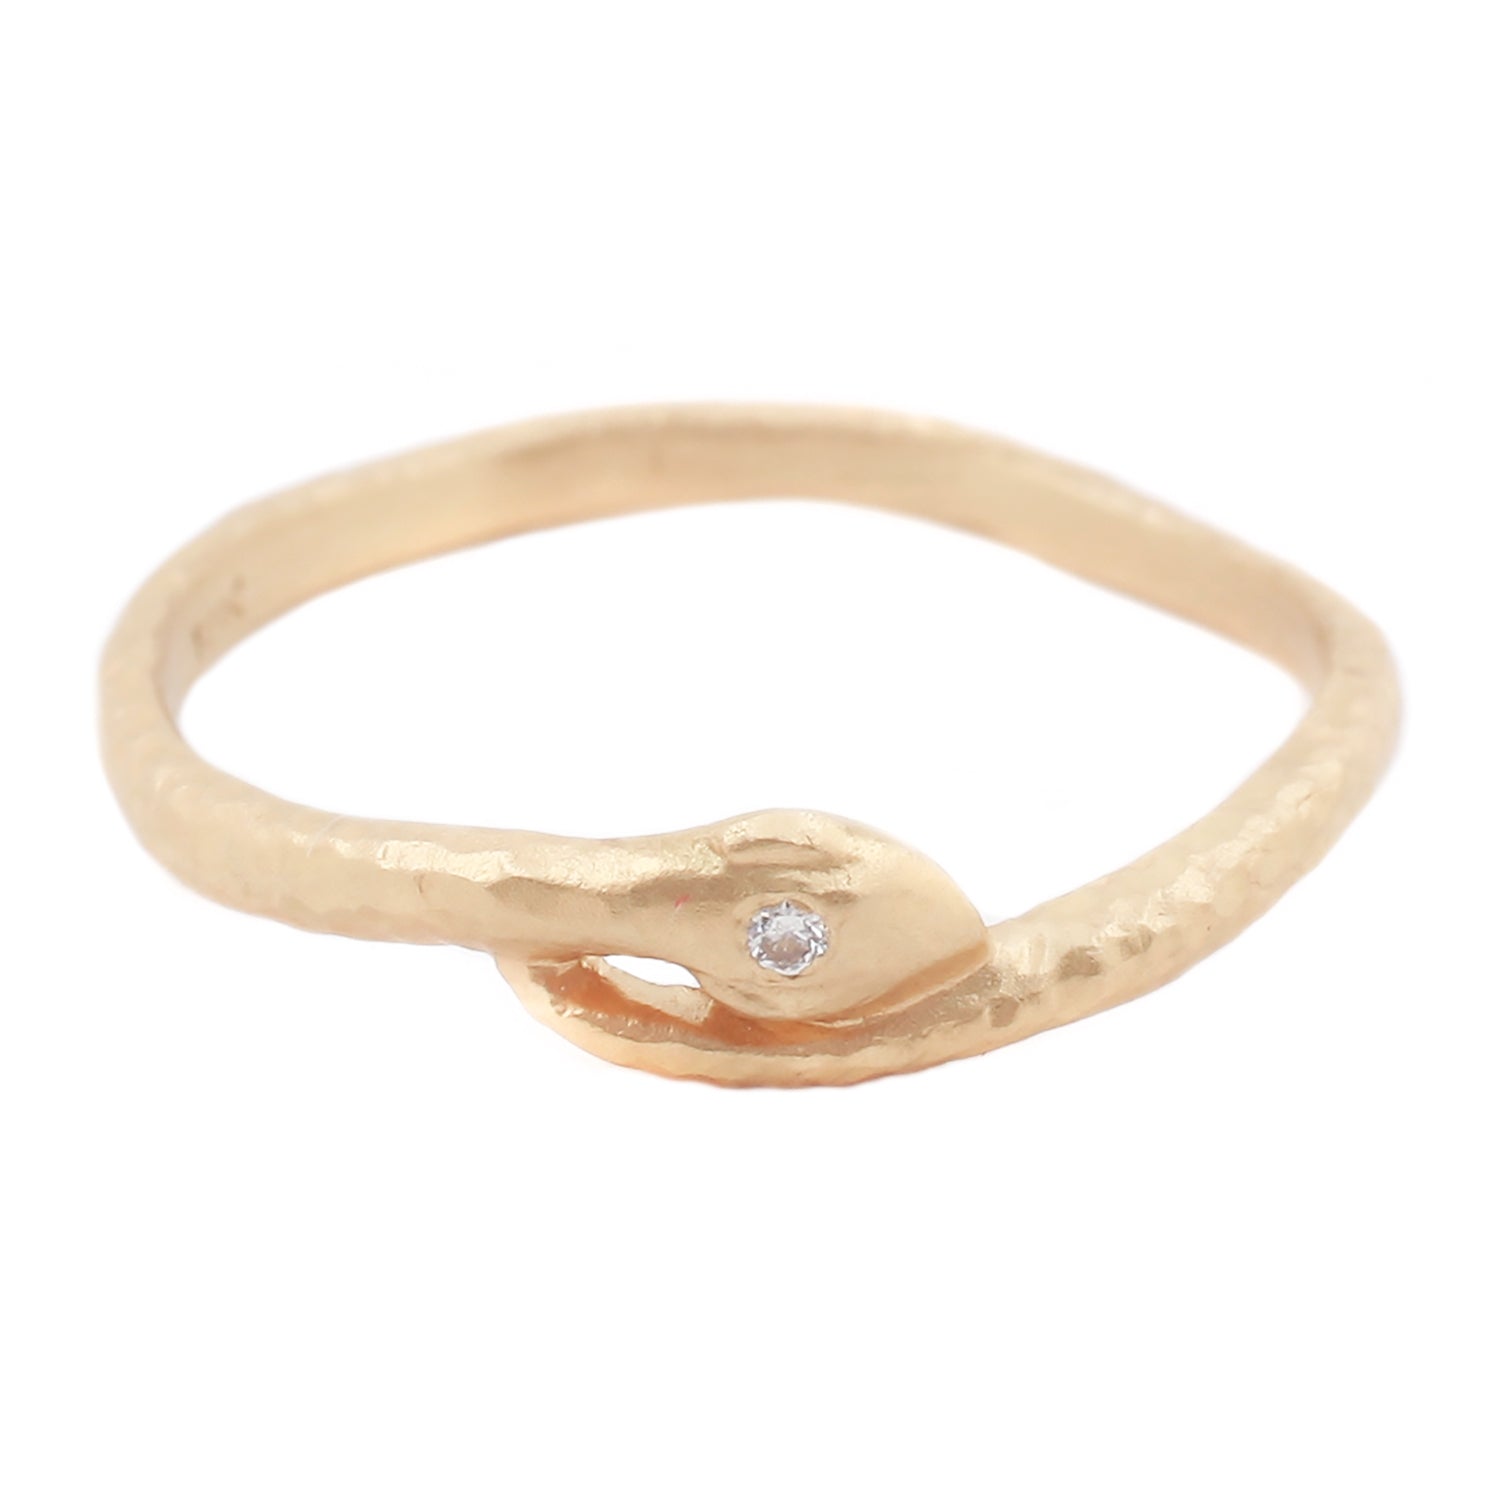 Sarah Swell Gold Serpent with Diamond Eye Band Ring